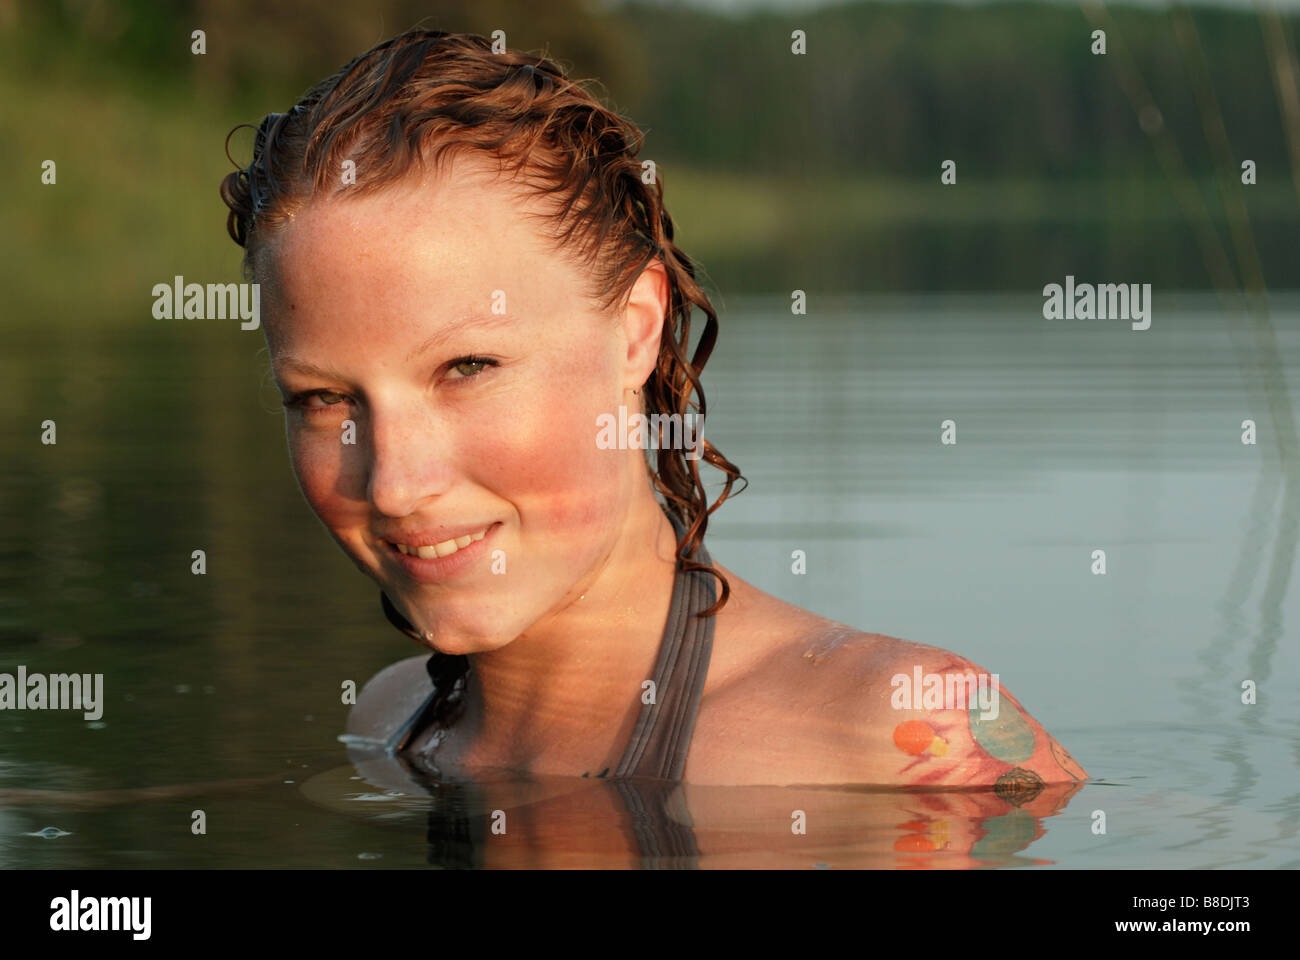 Woman with head and shoulders above water of lake, Lake Katherine, Riding Mountain National Park, Manitoba, Canada Stock Photo